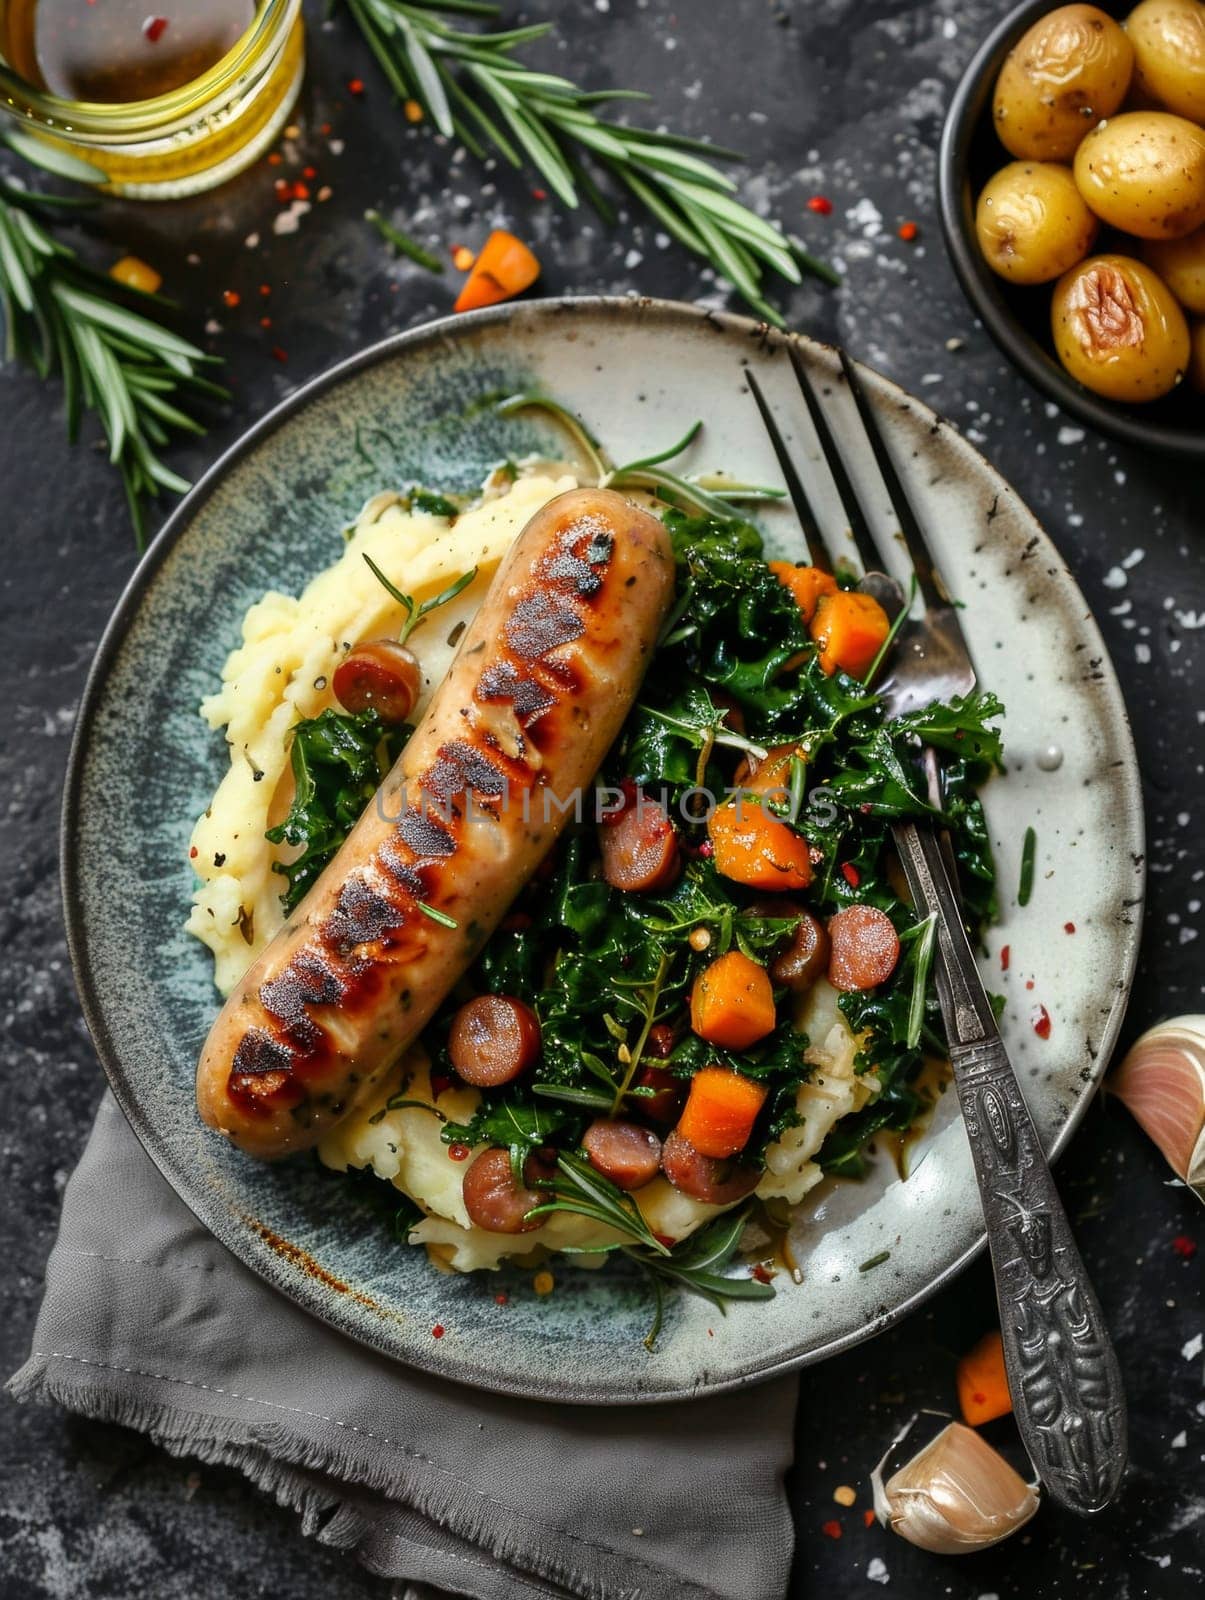 Dutch stamppot, a comforting dish of mashed potatoes mixed with kale, served with a flavorful smoked sausage. This traditional recipe showcases the heartwarming, wholesome flavors of Dutch cuisine. by sfinks